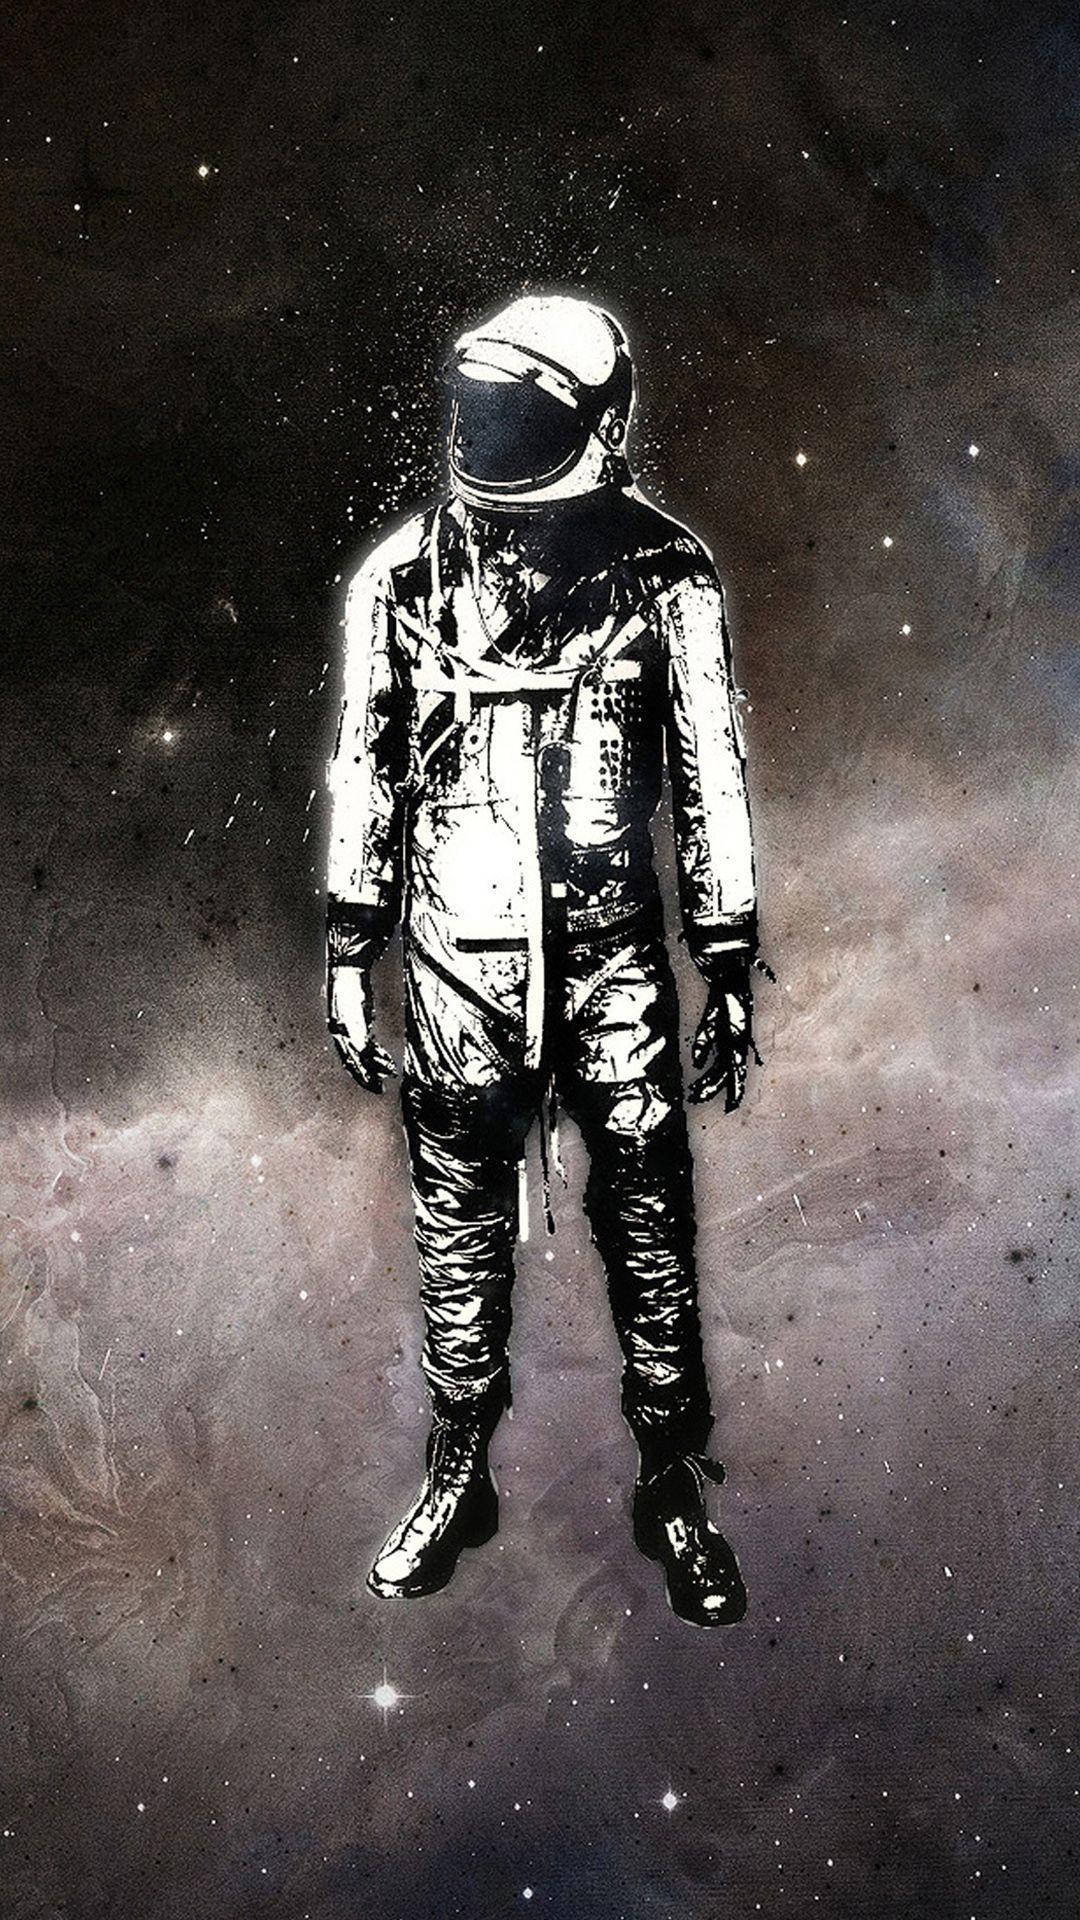 Thrilling Image Of Spaceman